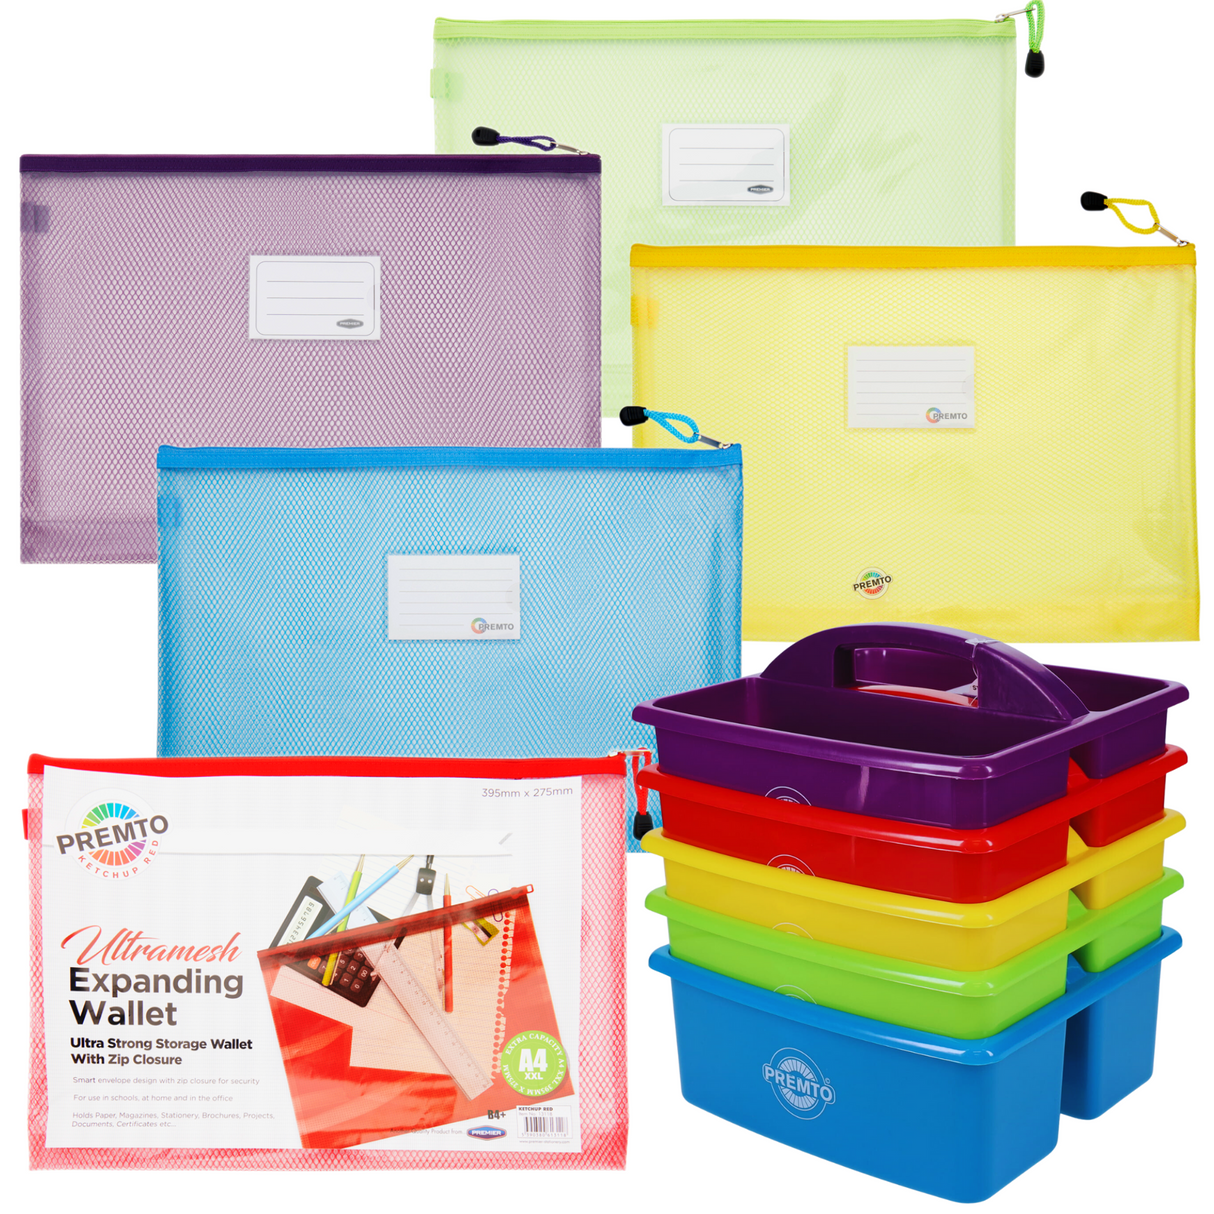 Premto Multipack | Storage Solutions Caddy and Ultramesh Wallets - Pack of 10-Storage Caddies-Premto | Buy Online at Stationery Shop